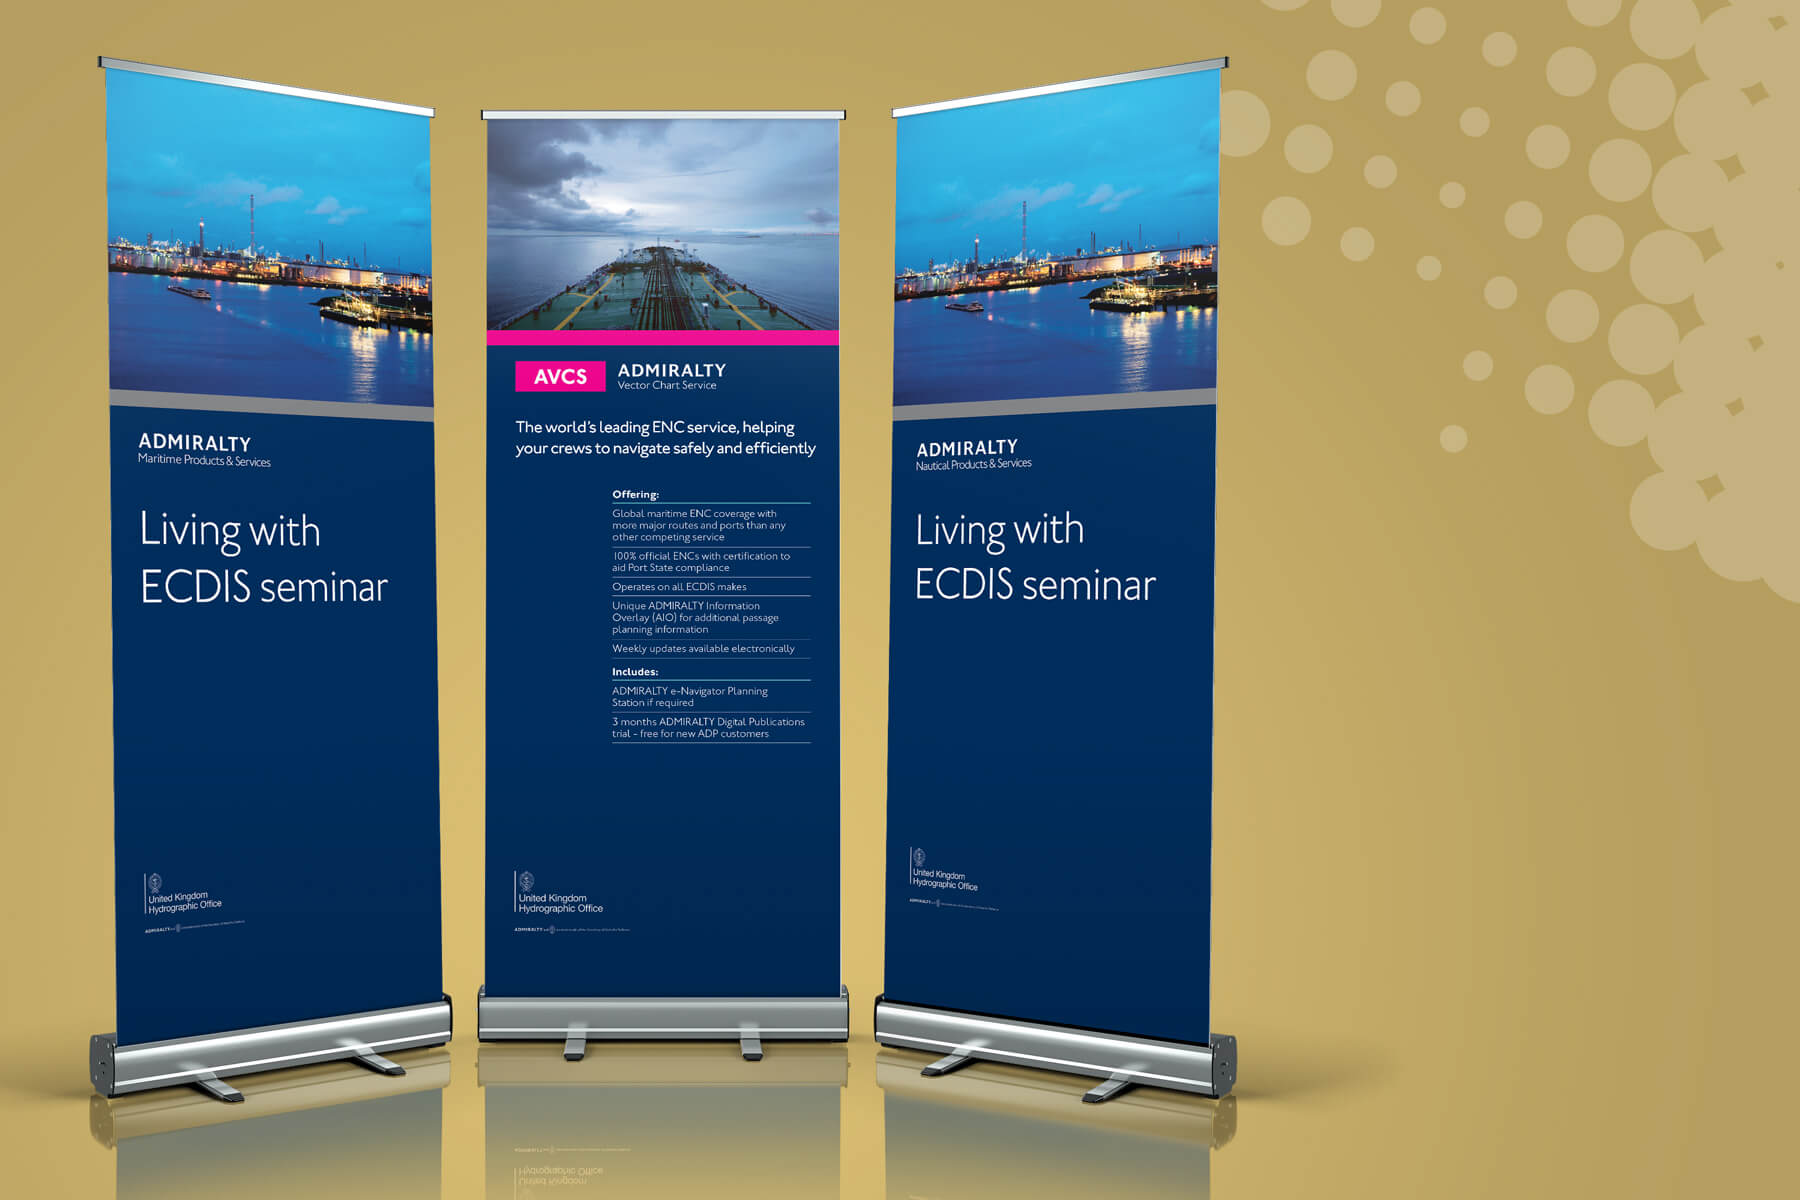 Pull-up Conference Banners for The Admiralty